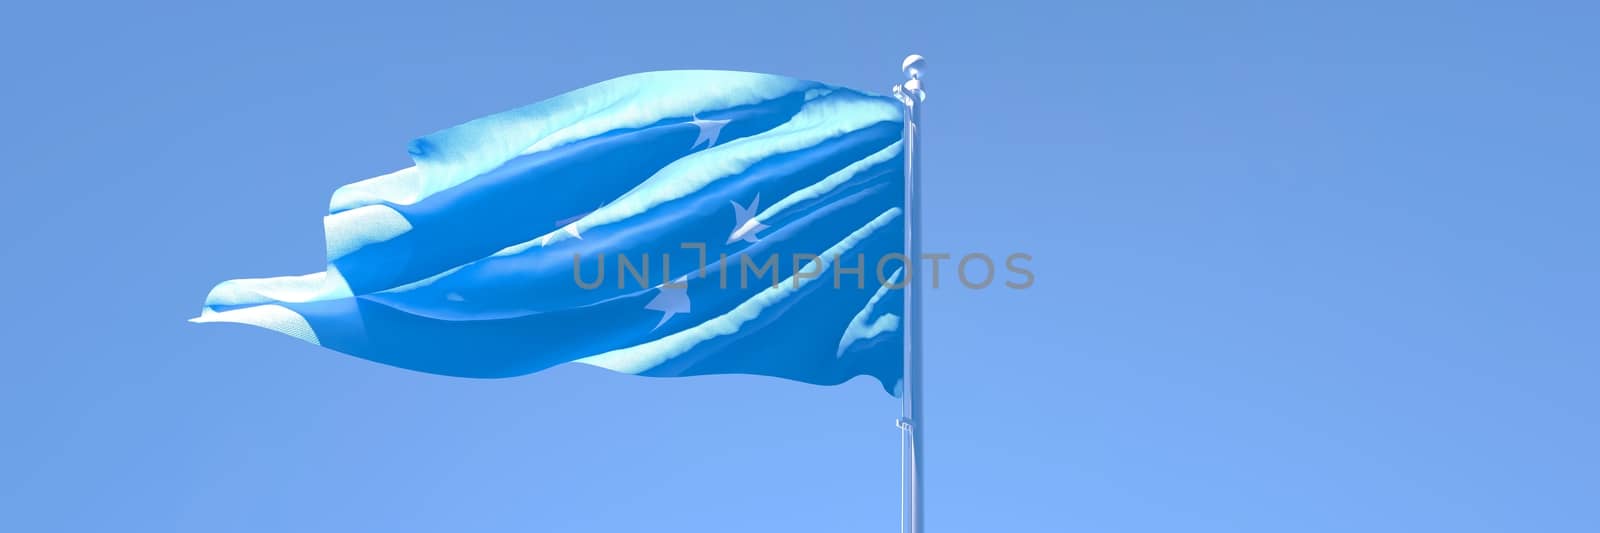 3D rendering of the national flag of Micronesia waving in the wind against a blue sky